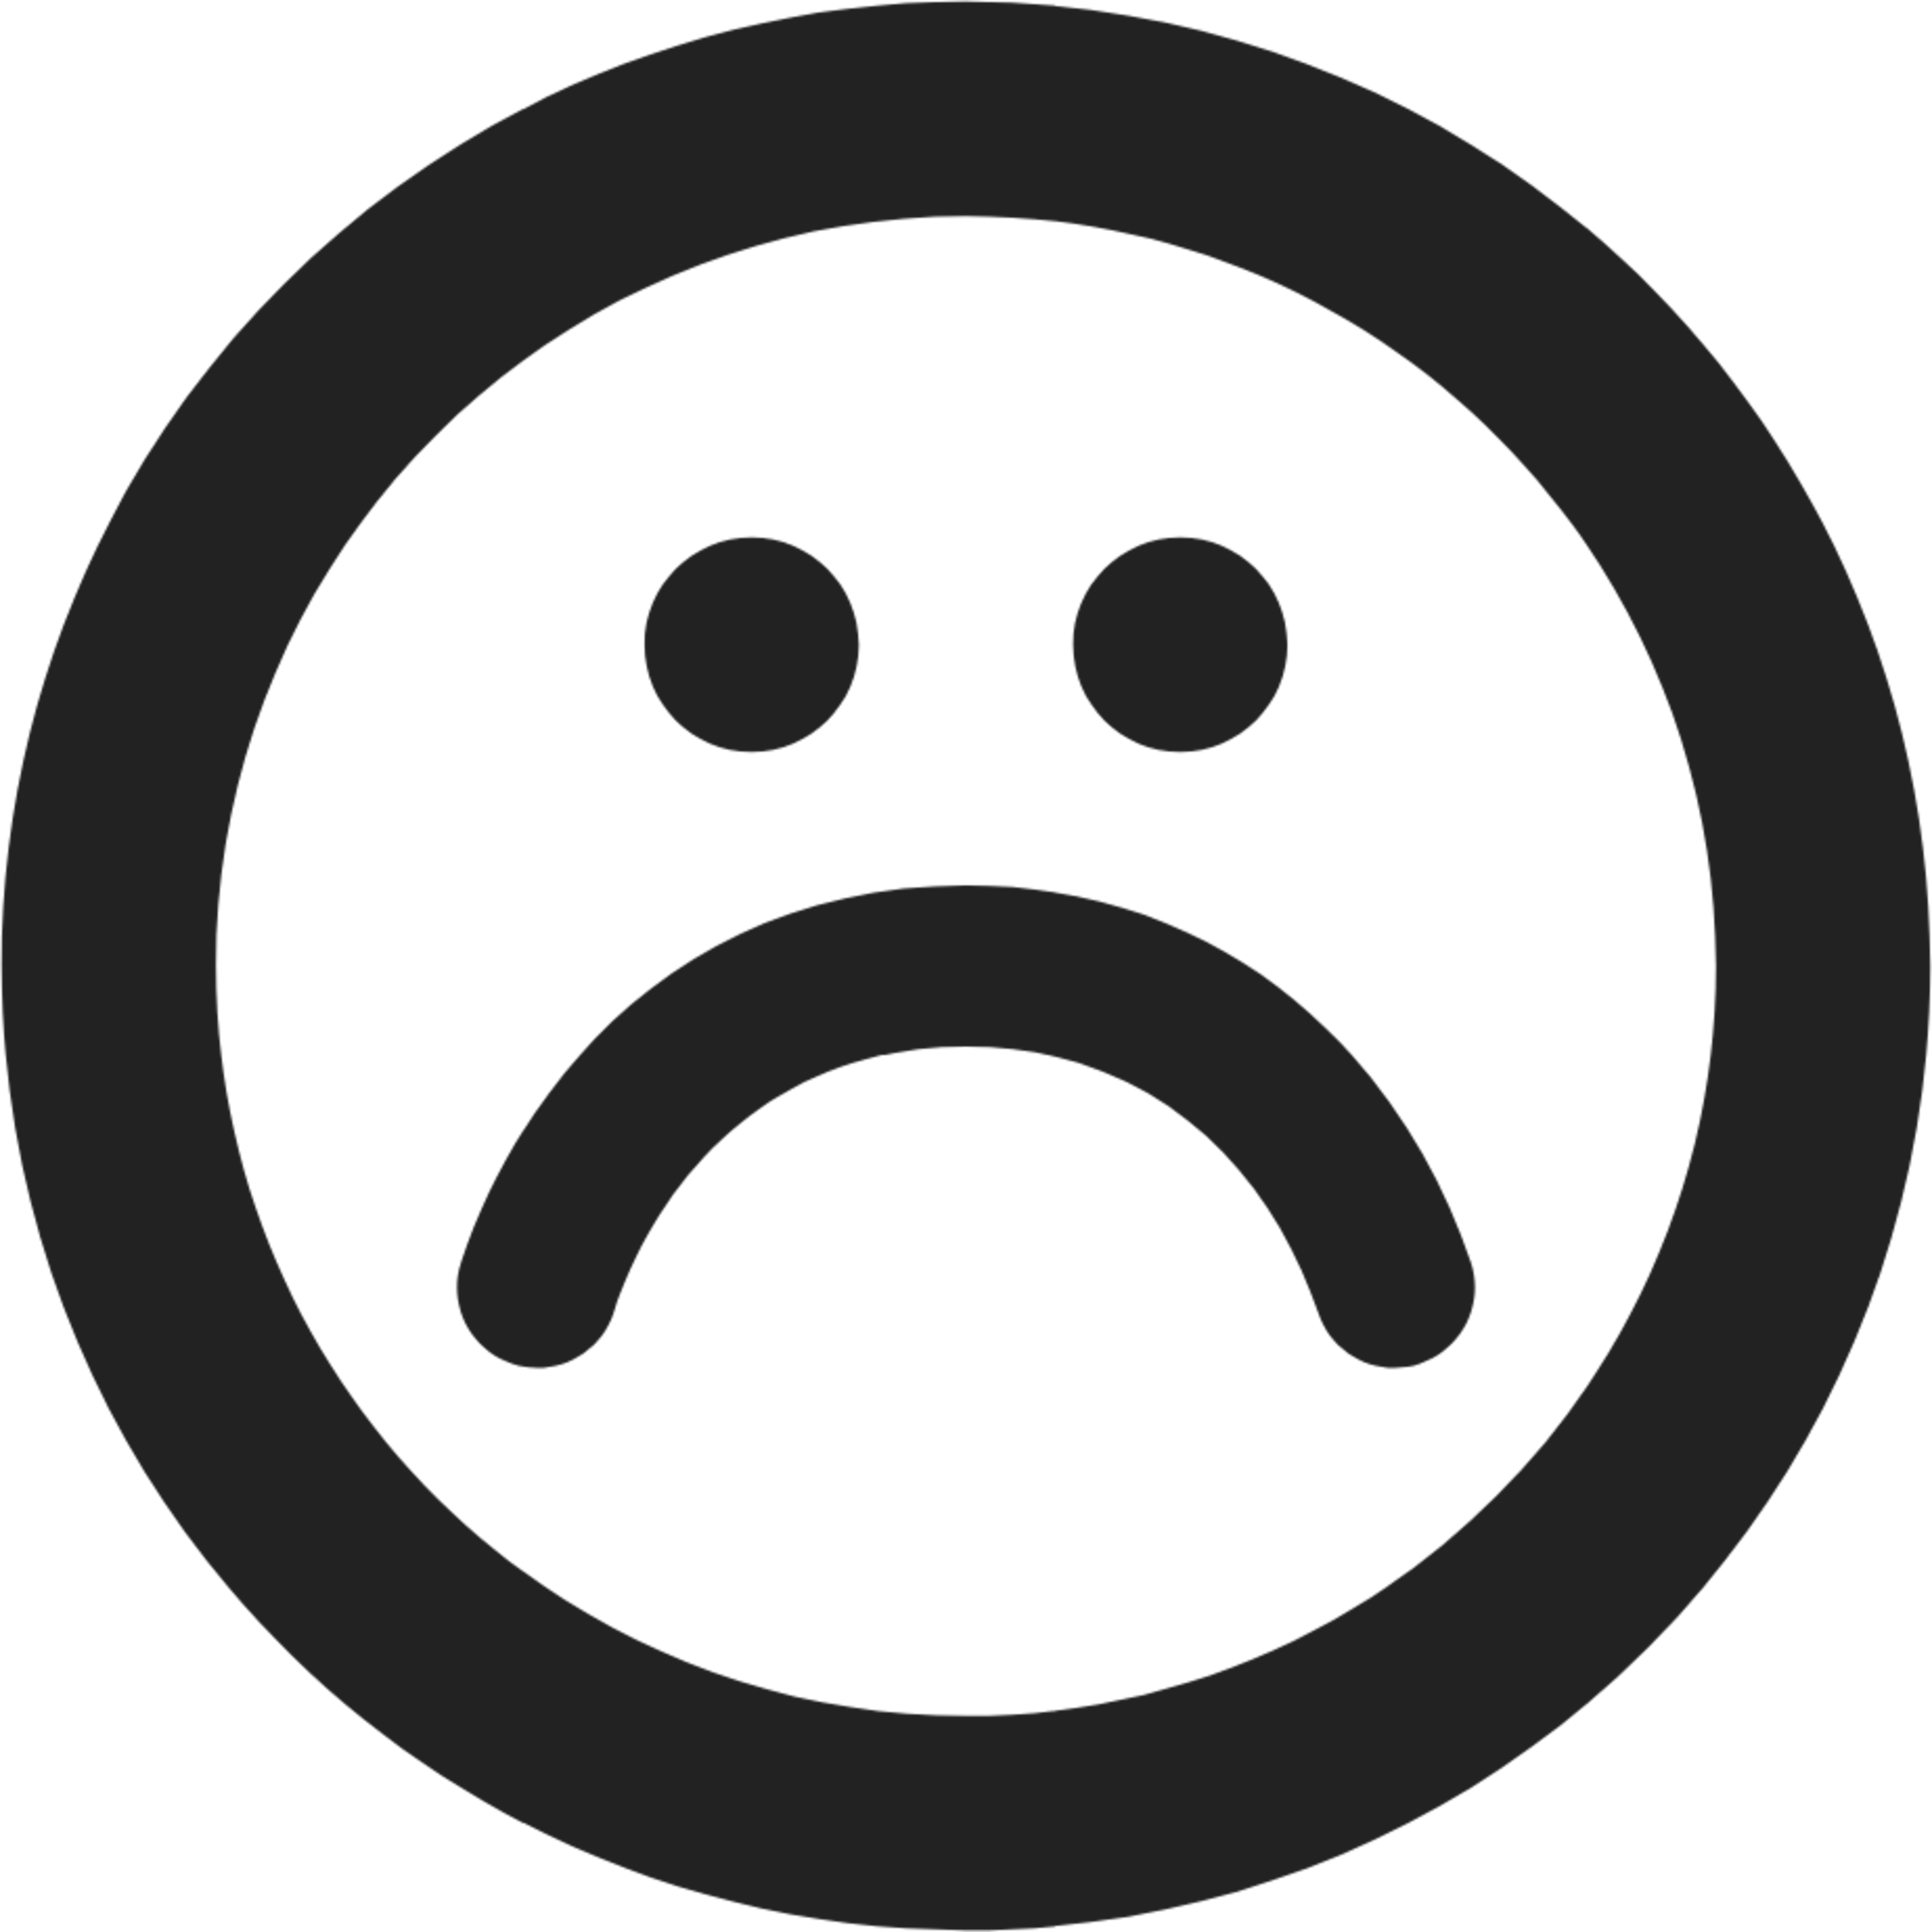 frown sad face icon